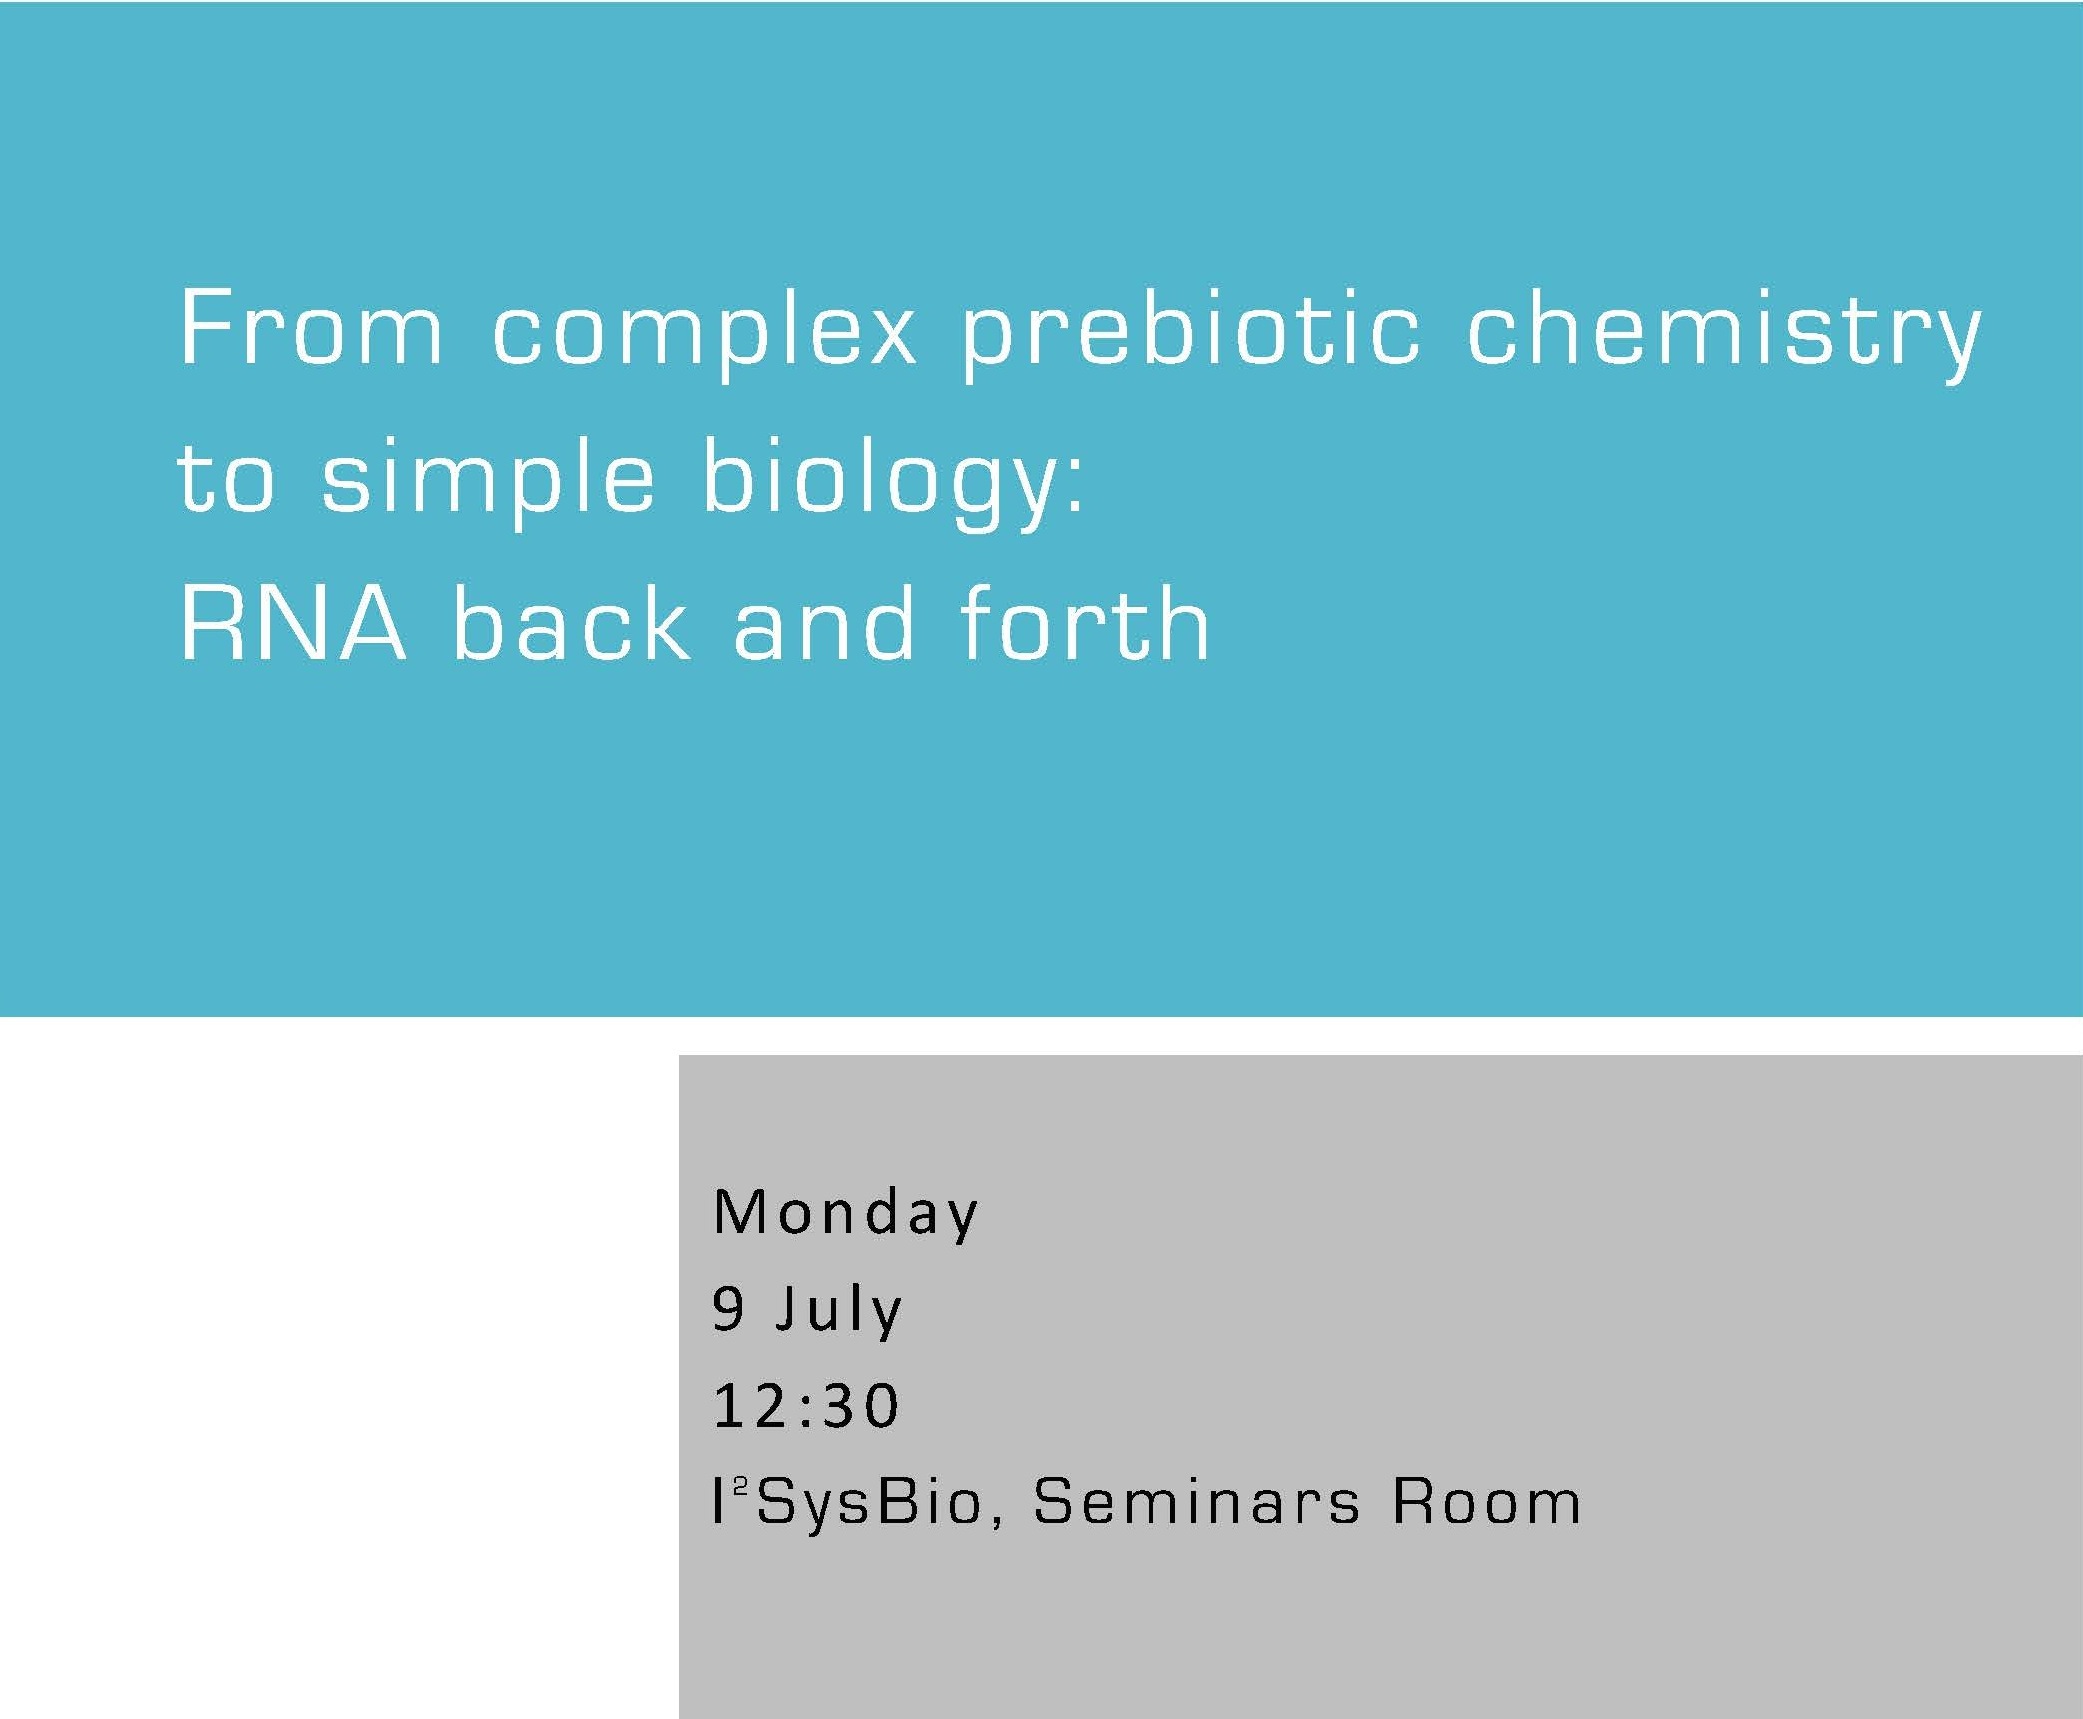 From complex prebiotic chemistry to simple biology: RNA back and forth